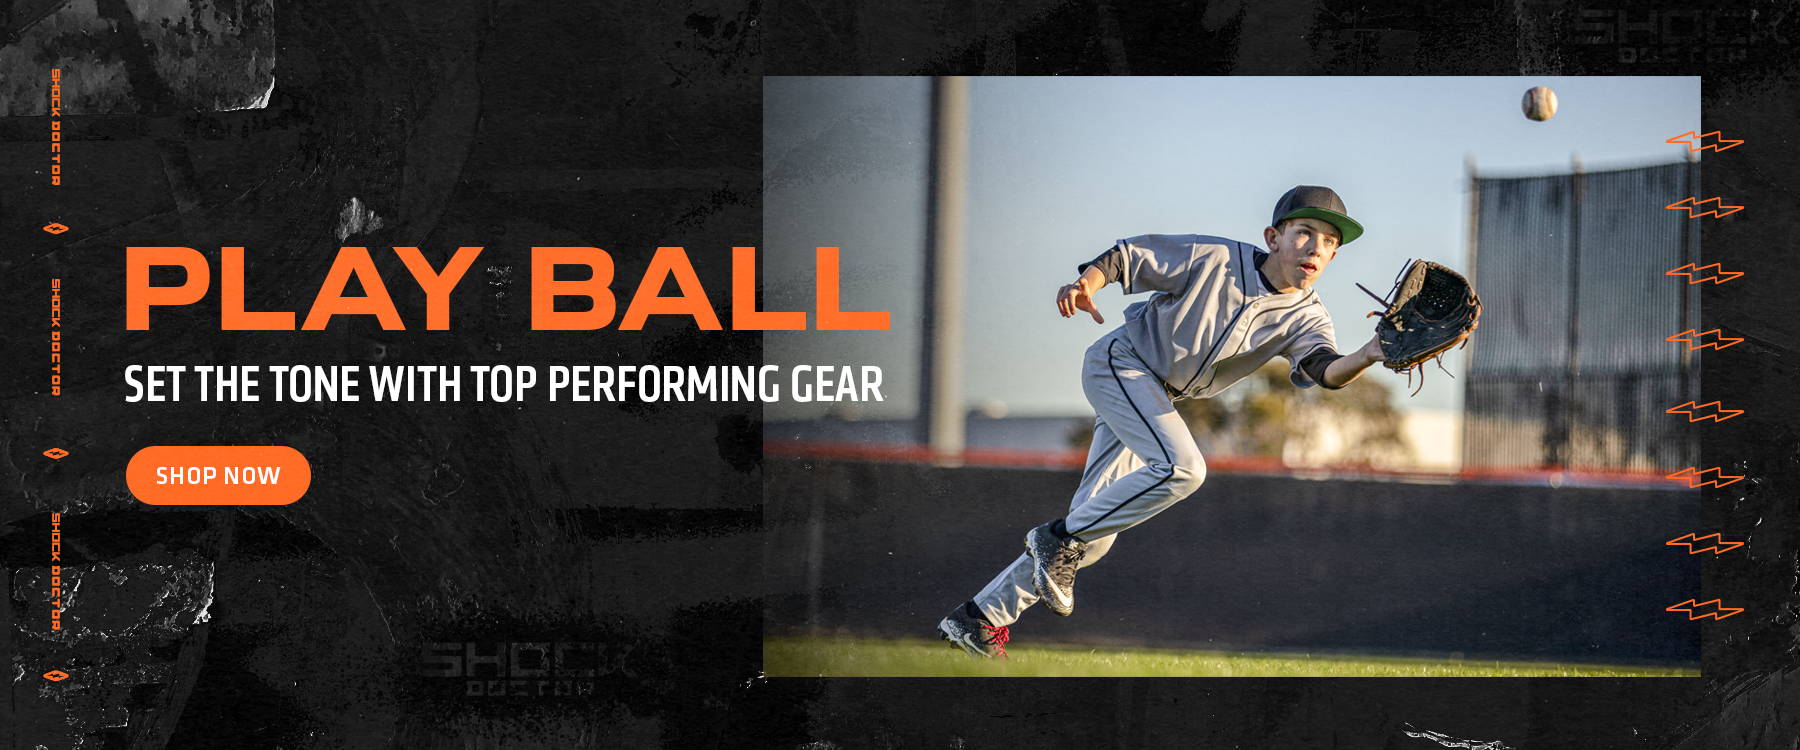 PLAY BALL Set The Tone With Performing Gear SHOP NOW